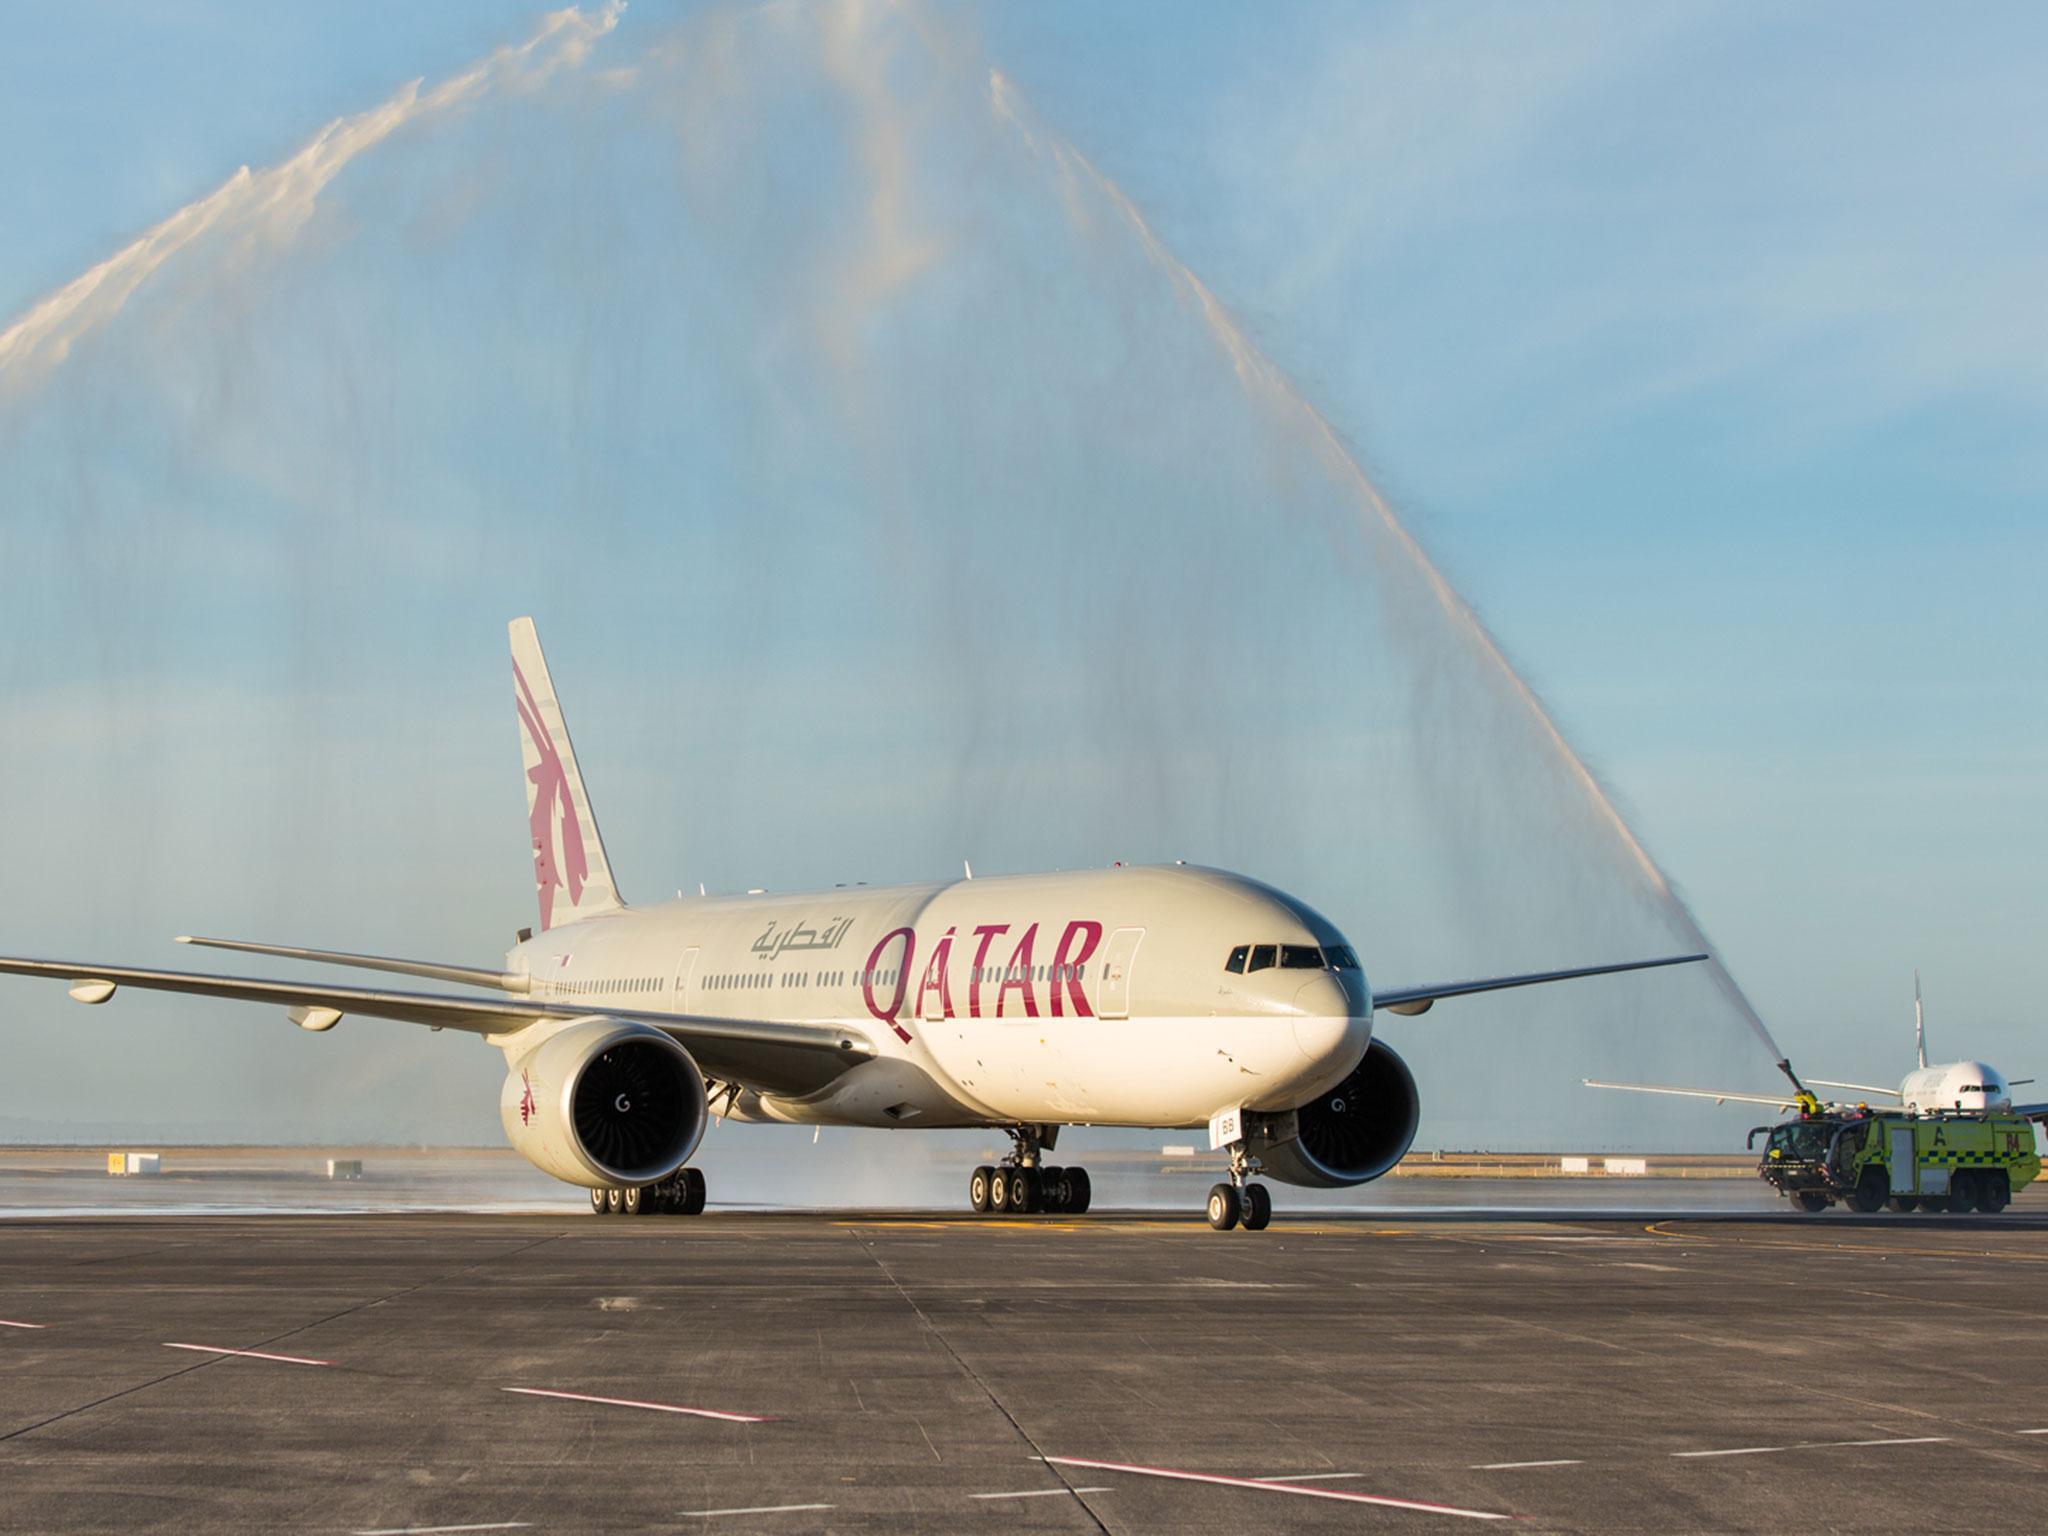 The flight from Doha is sprayed with water canons as it lands in Auckland